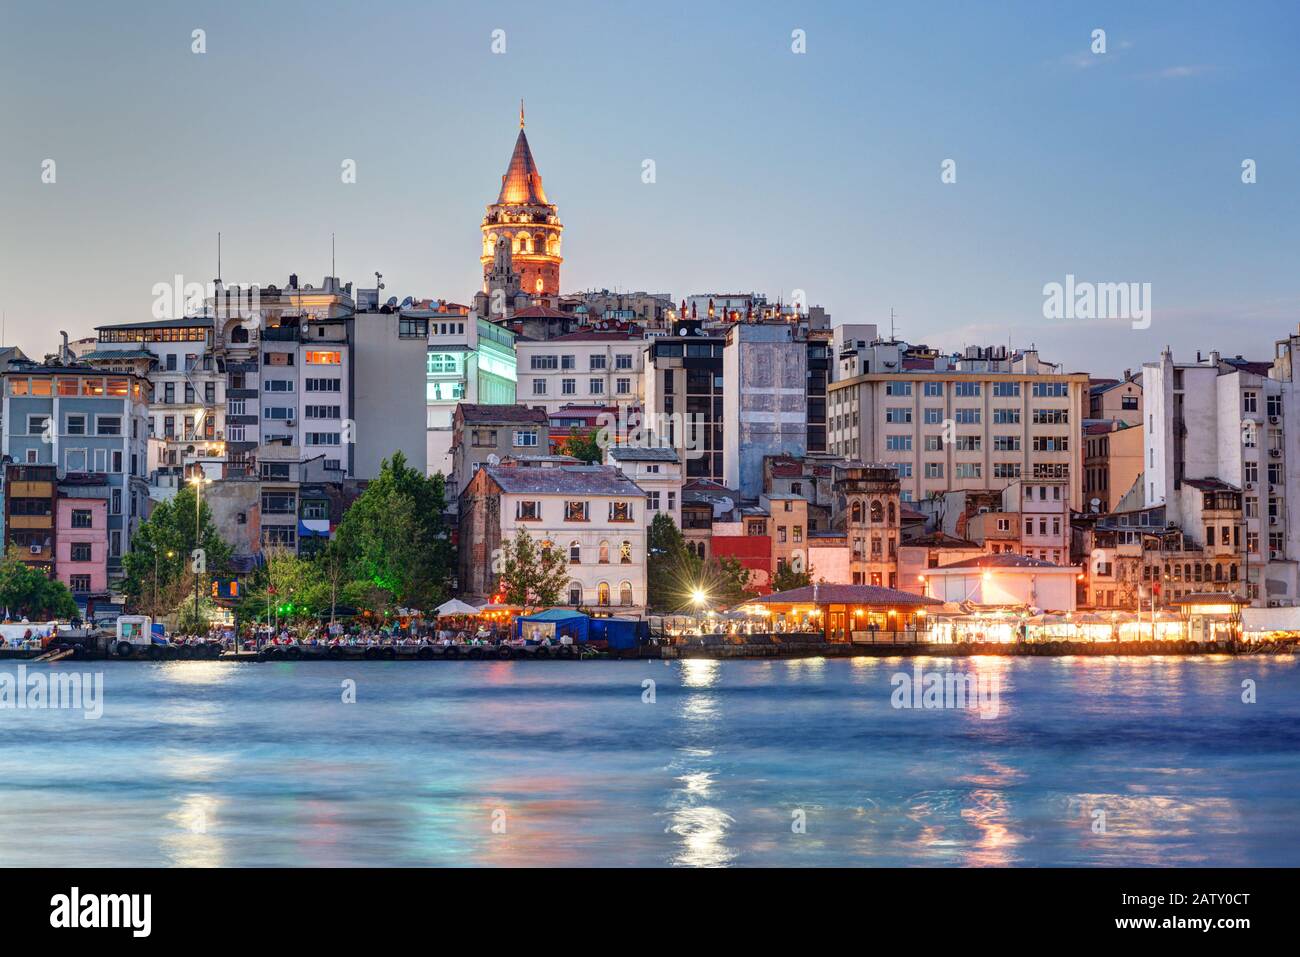 View of Galata district at night, Istanbul, Turkey Stock Photo